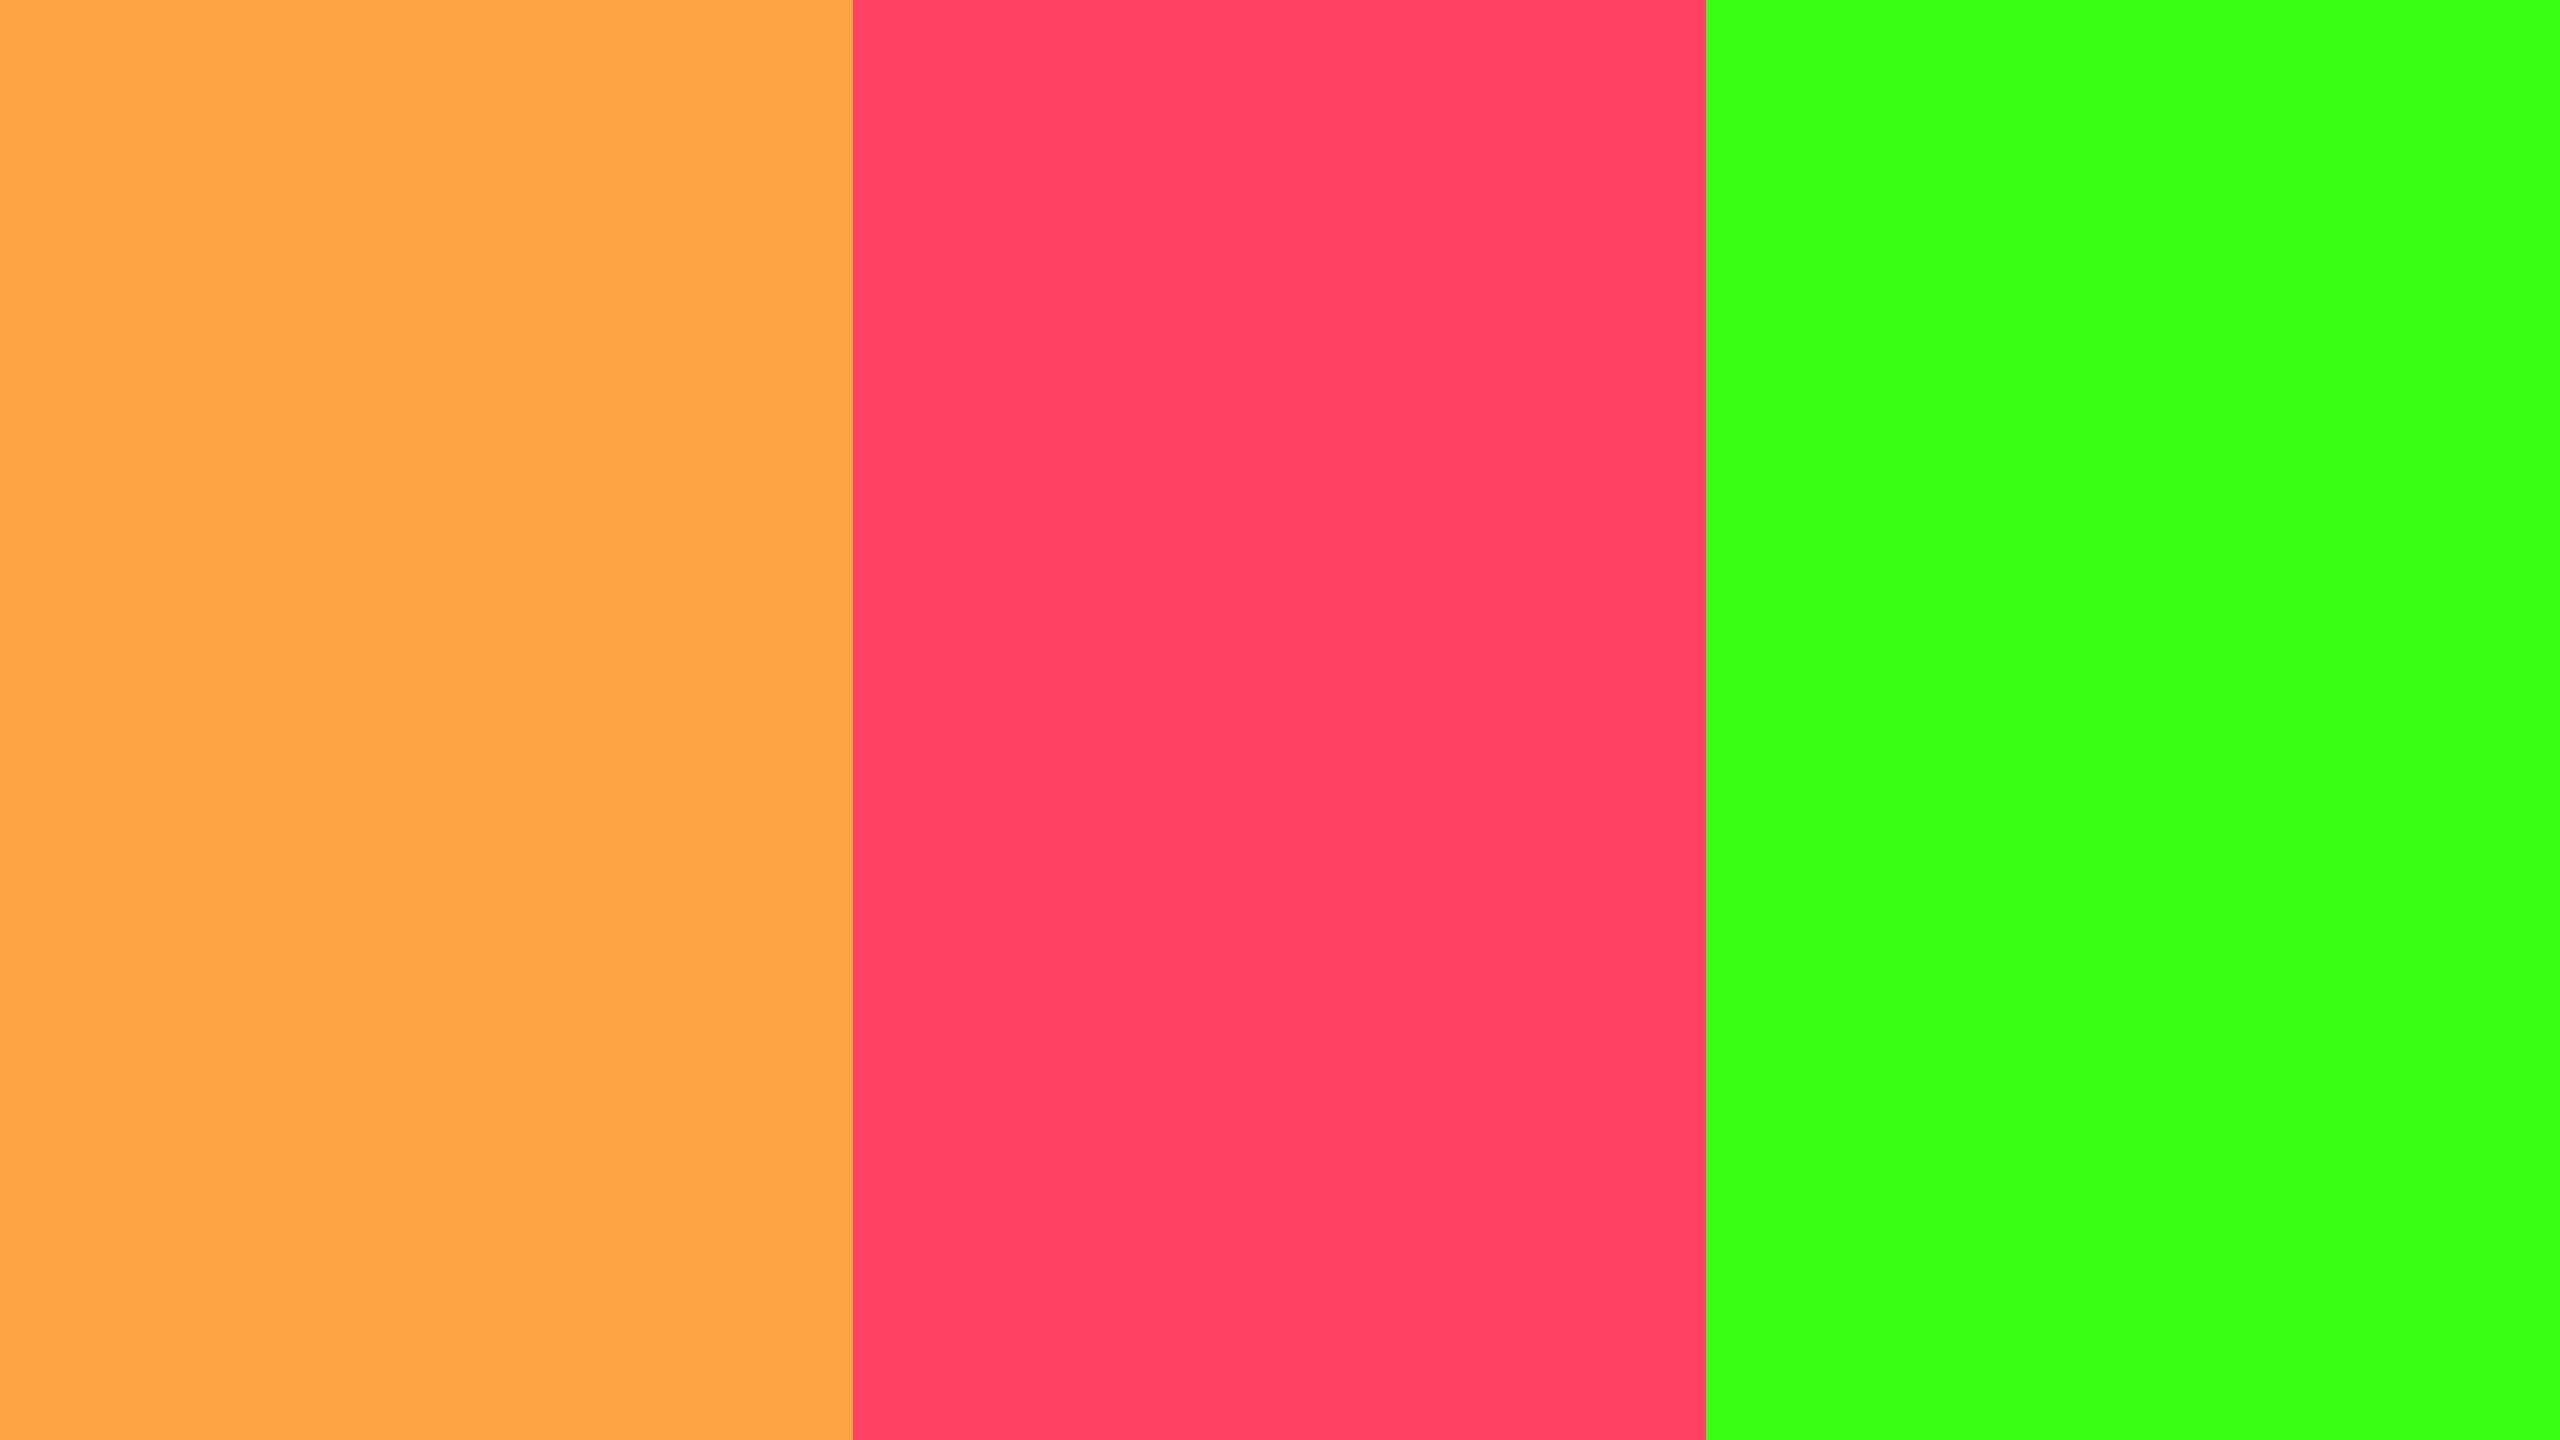 2560x1440 Neon Carrot, Neon Fuchsia and Neon Green solid three color background .